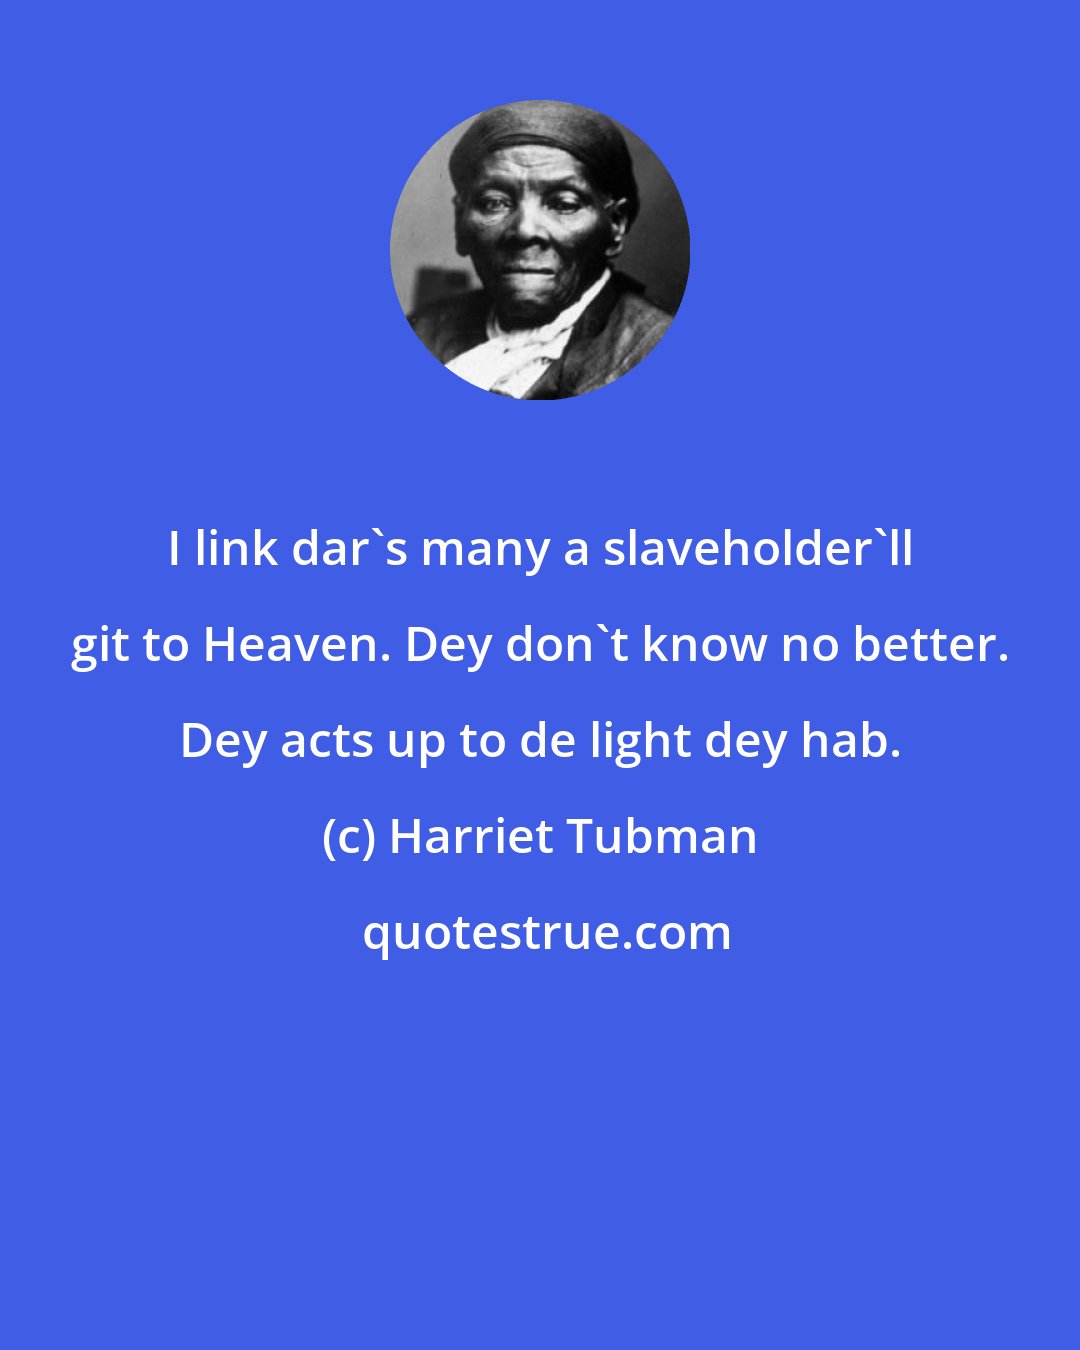 Harriet Tubman: I link dar's many a slaveholder'll git to Heaven. Dey don't know no better. Dey acts up to de light dey hab.